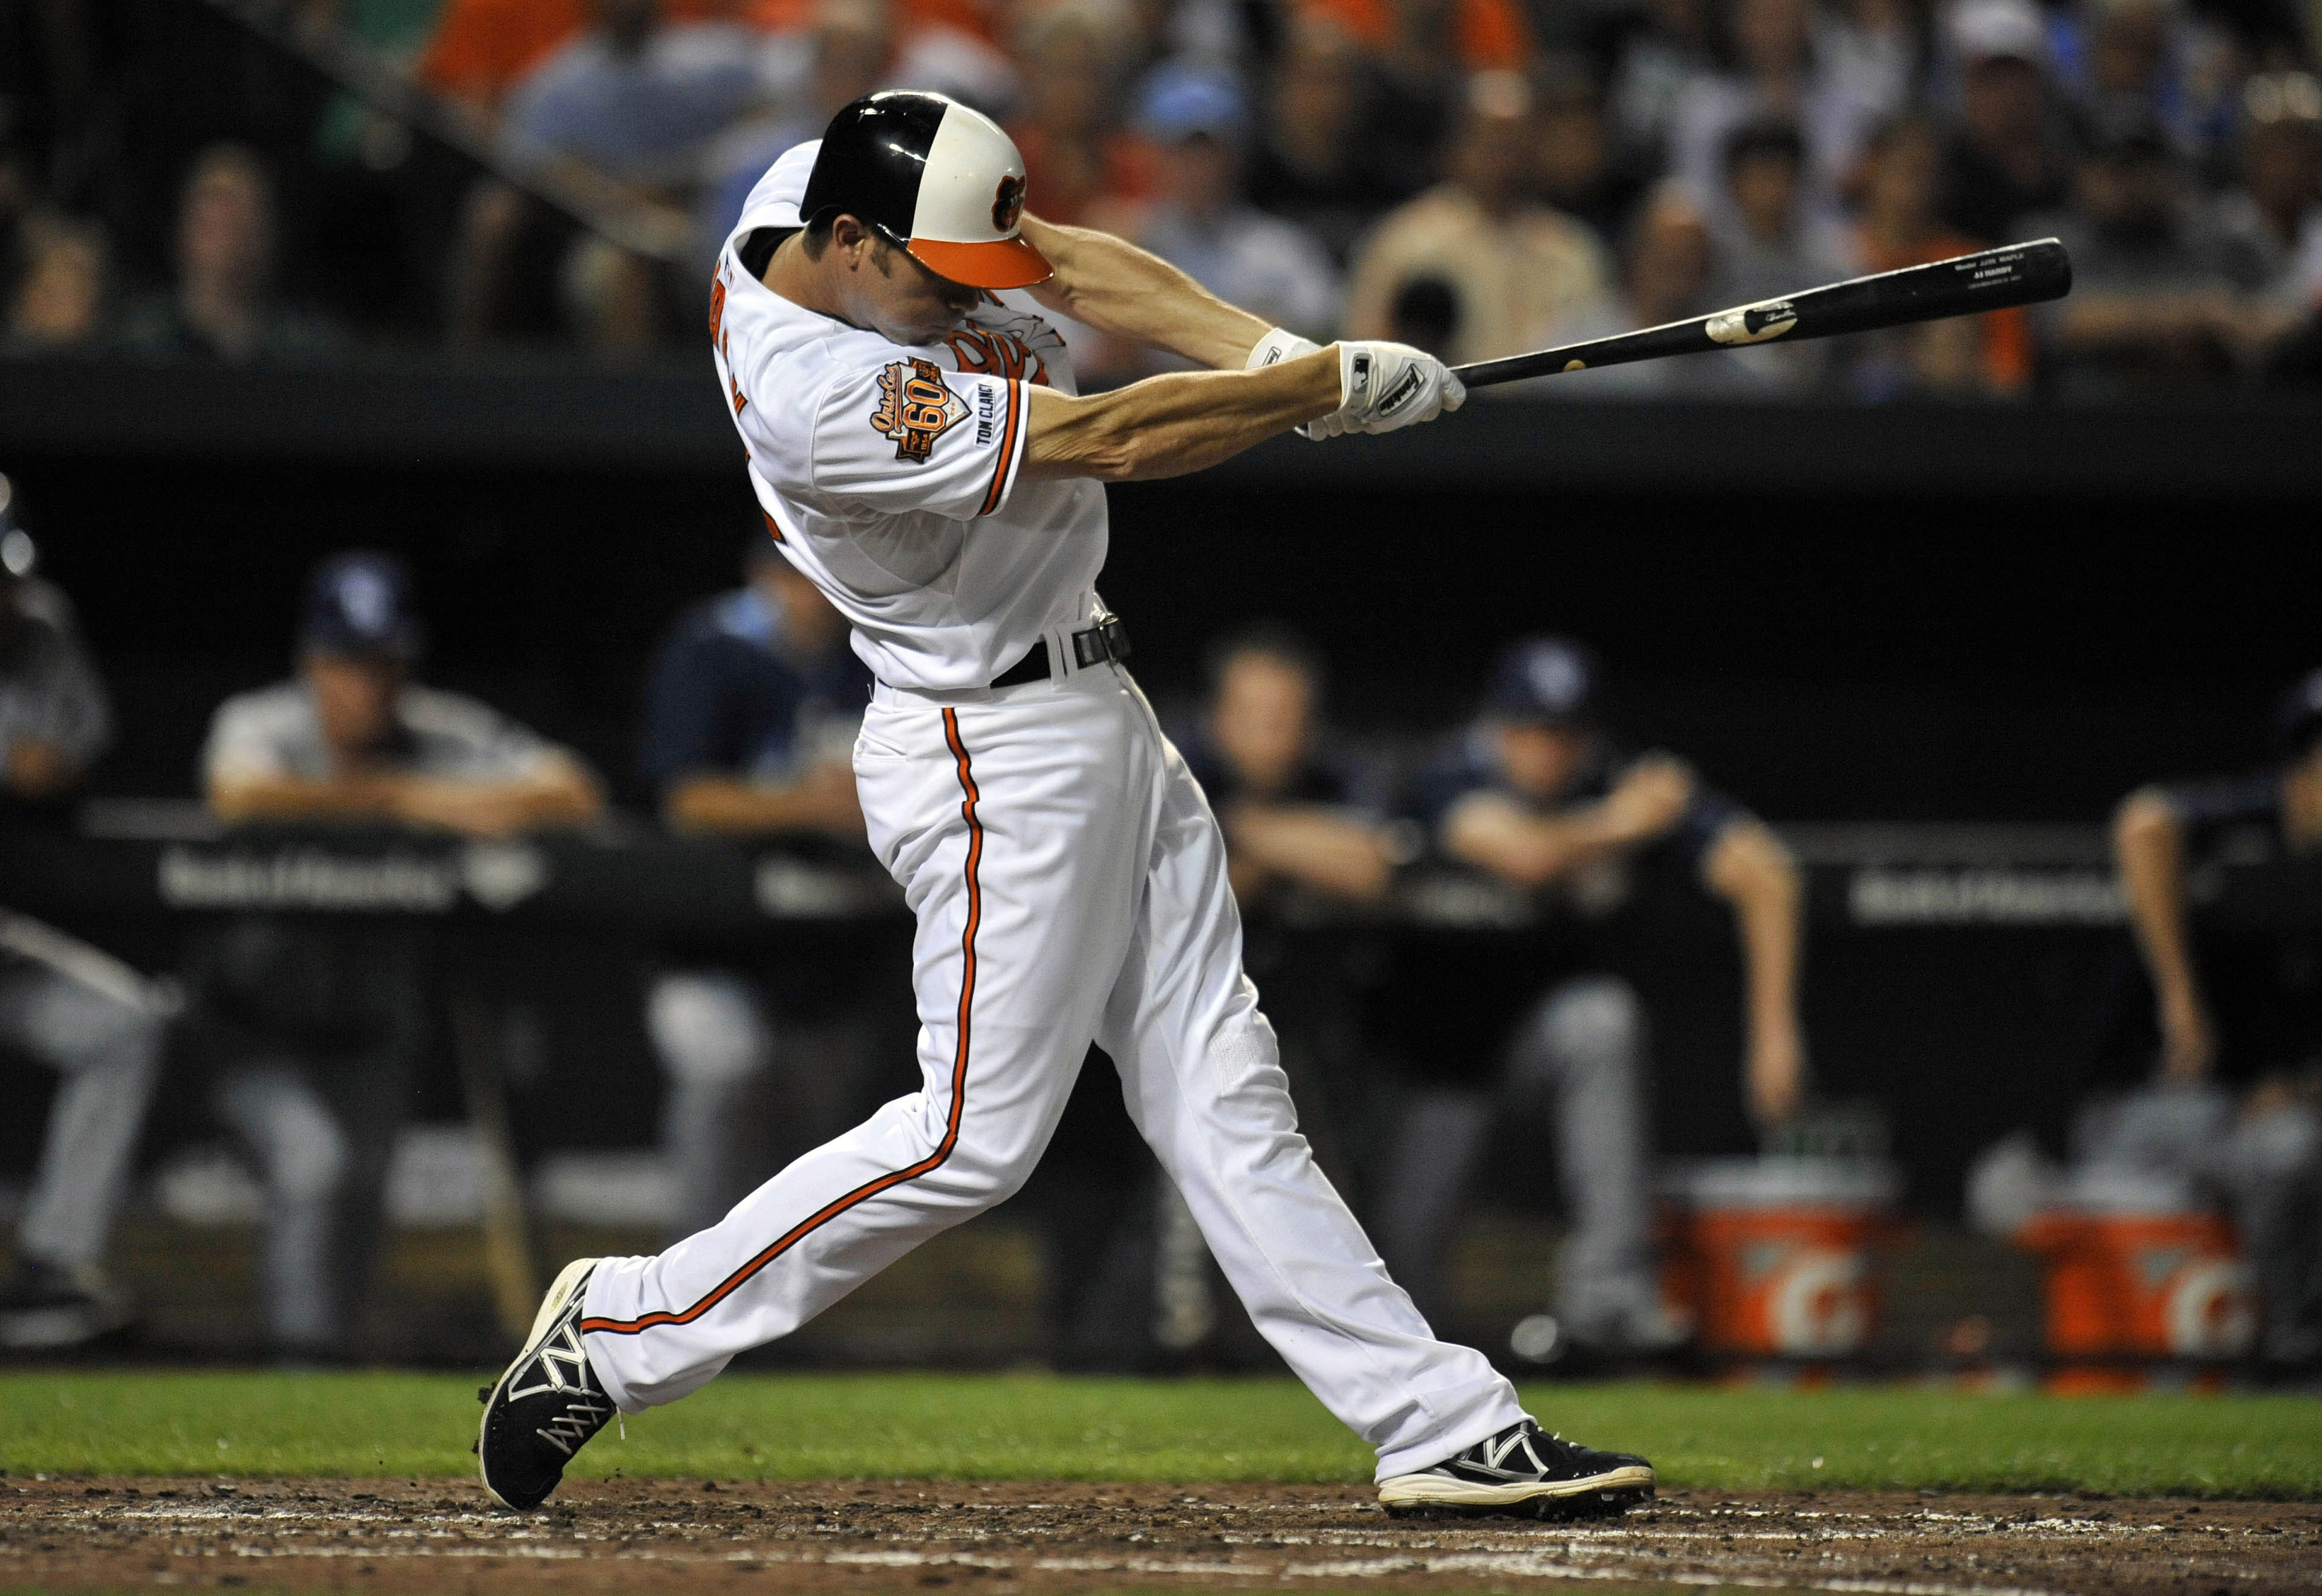 Orioles hit 5 HRs in 9-1 win over Rays